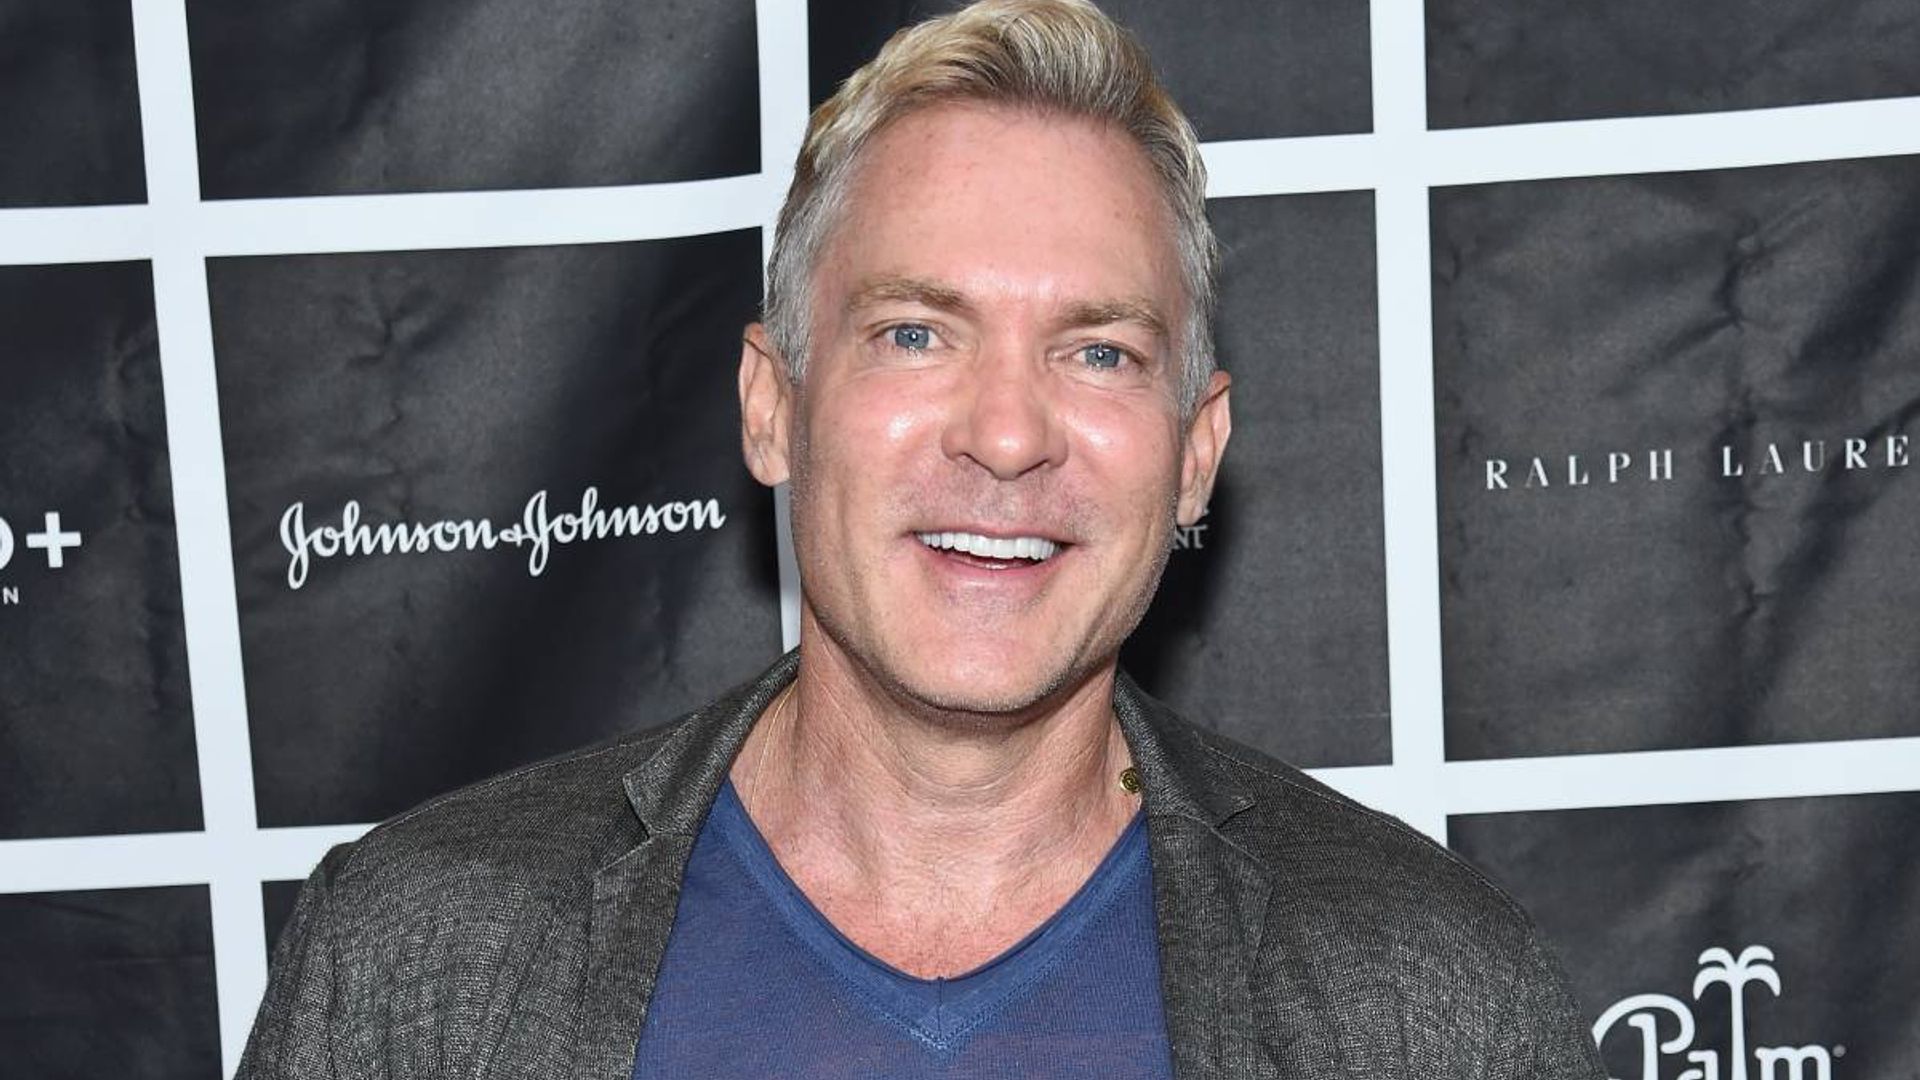 Sam Champion turns heads with shirtless workout photos